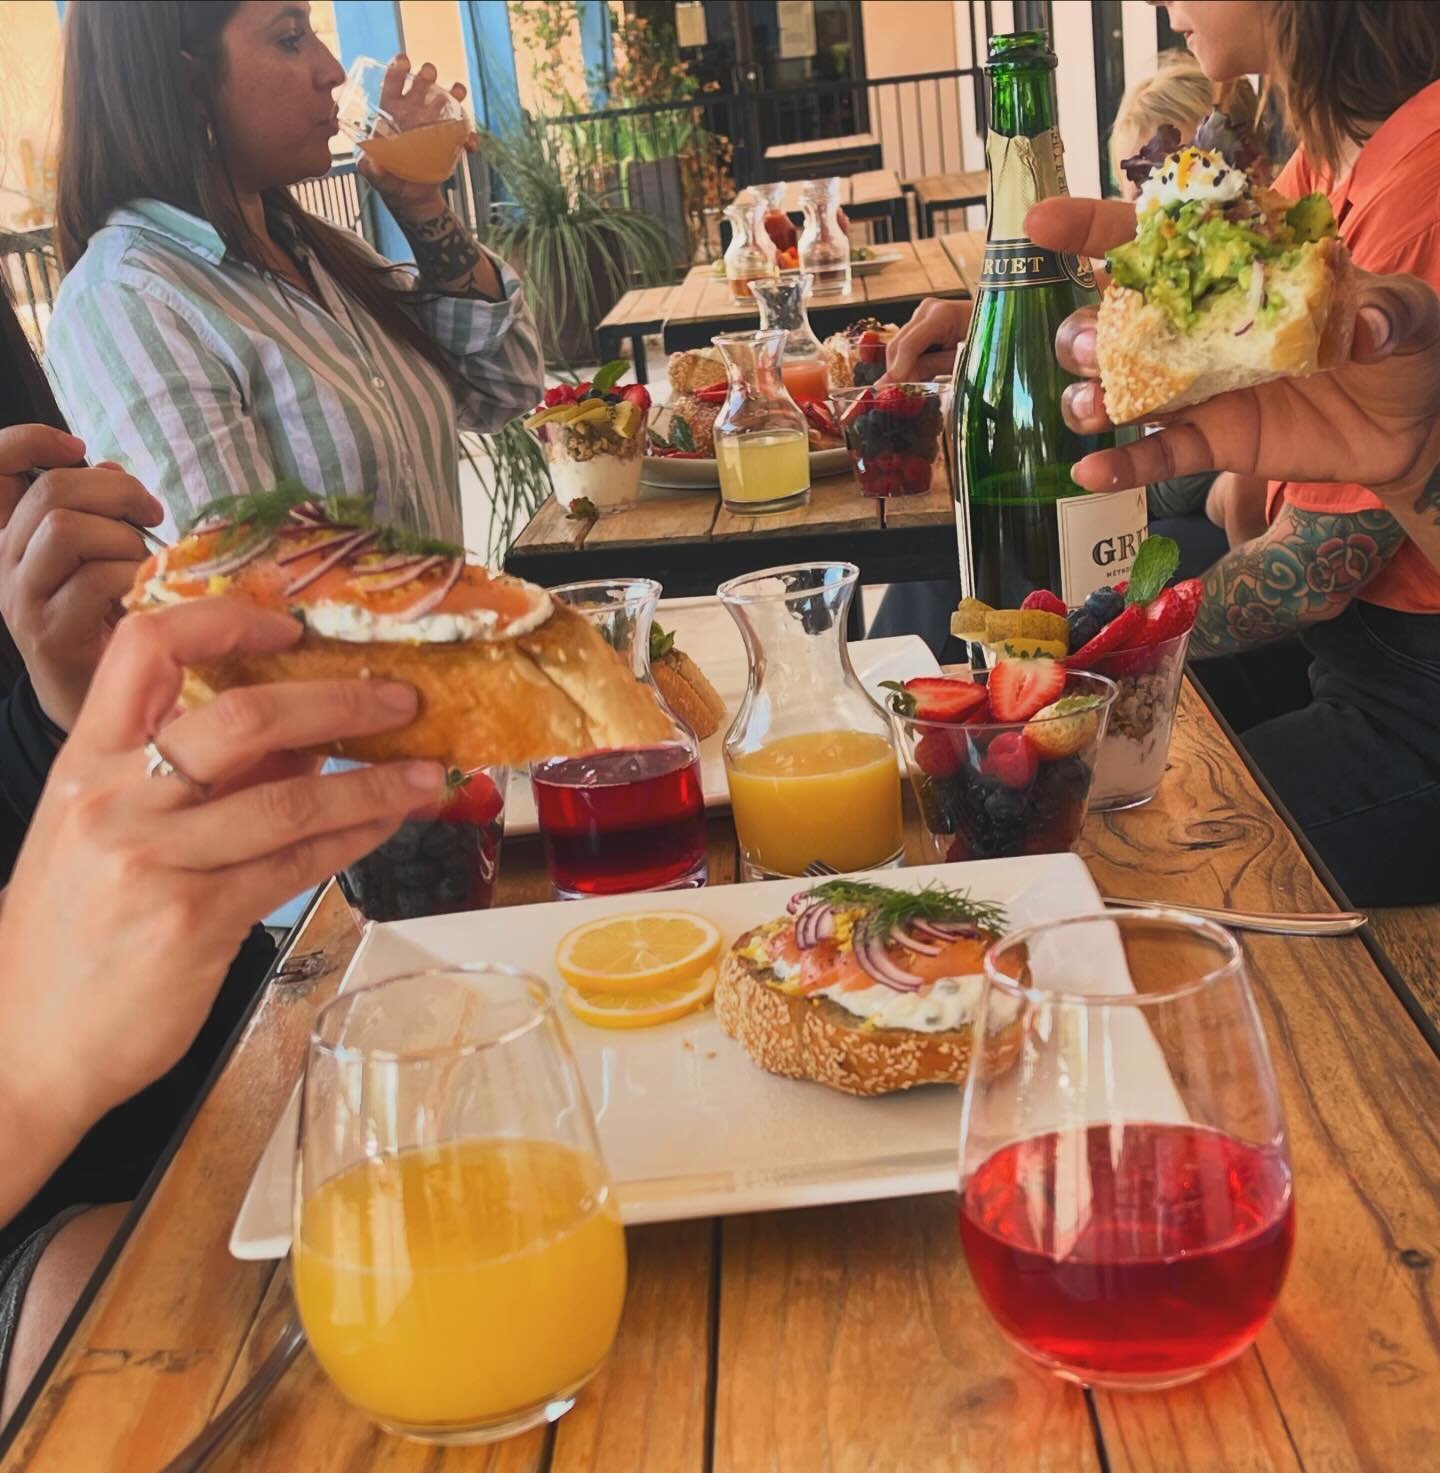 Feeling easy like a Sunday morning today? Why not make it easier with a treat? Come treat yourself with mimosas, fresh fruit, and even fresher food. It&rsquo;s brunch time baby! 
Open at 11!